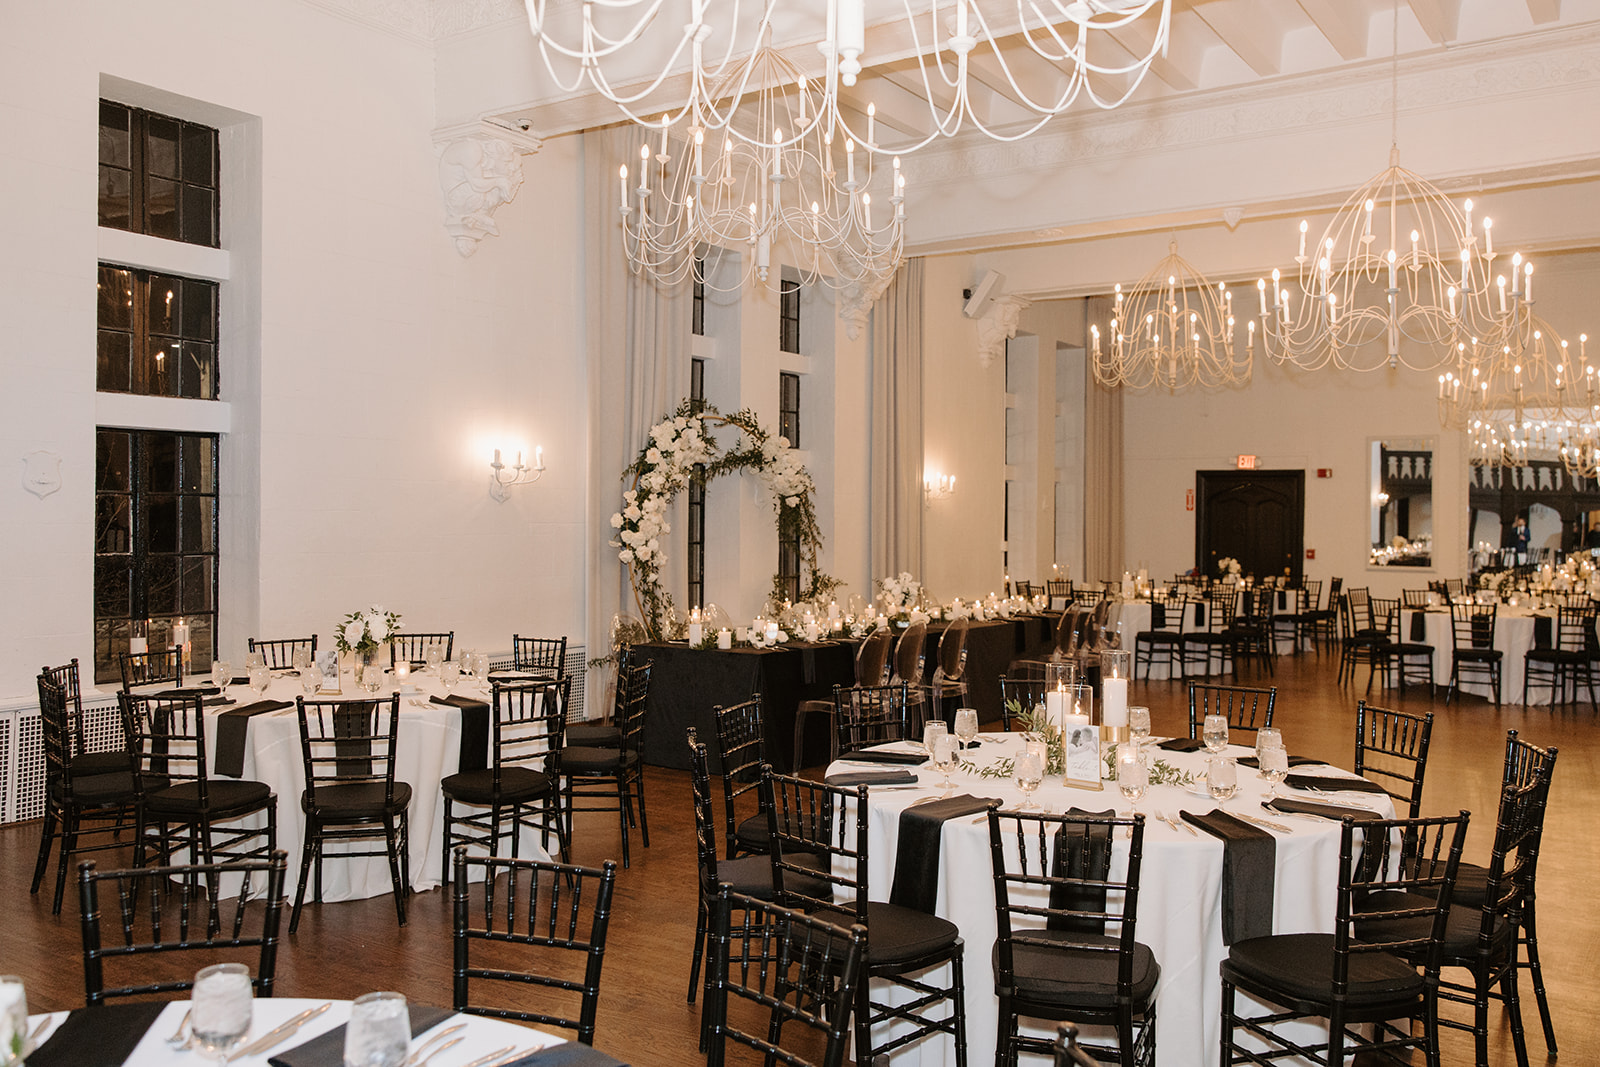 Vintage ballroom set up with white table clothed tables, black wooden chairs with the head table and wedding arbor in the background at Alden Castle.